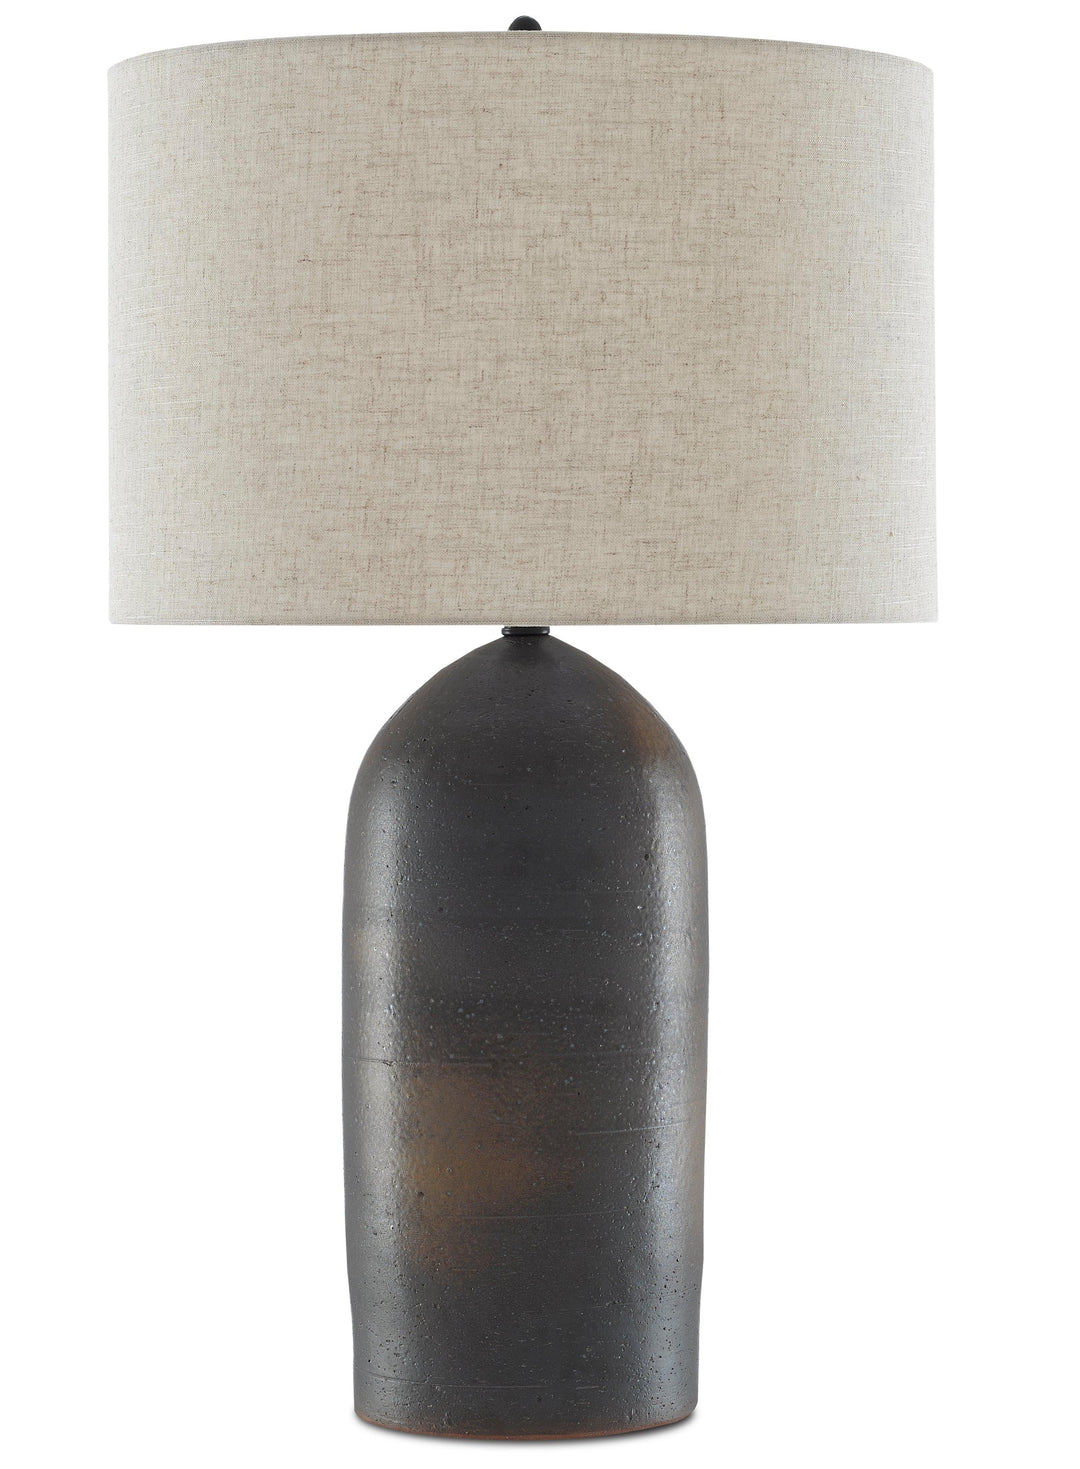 Munby Table Lamp - Casey & Company